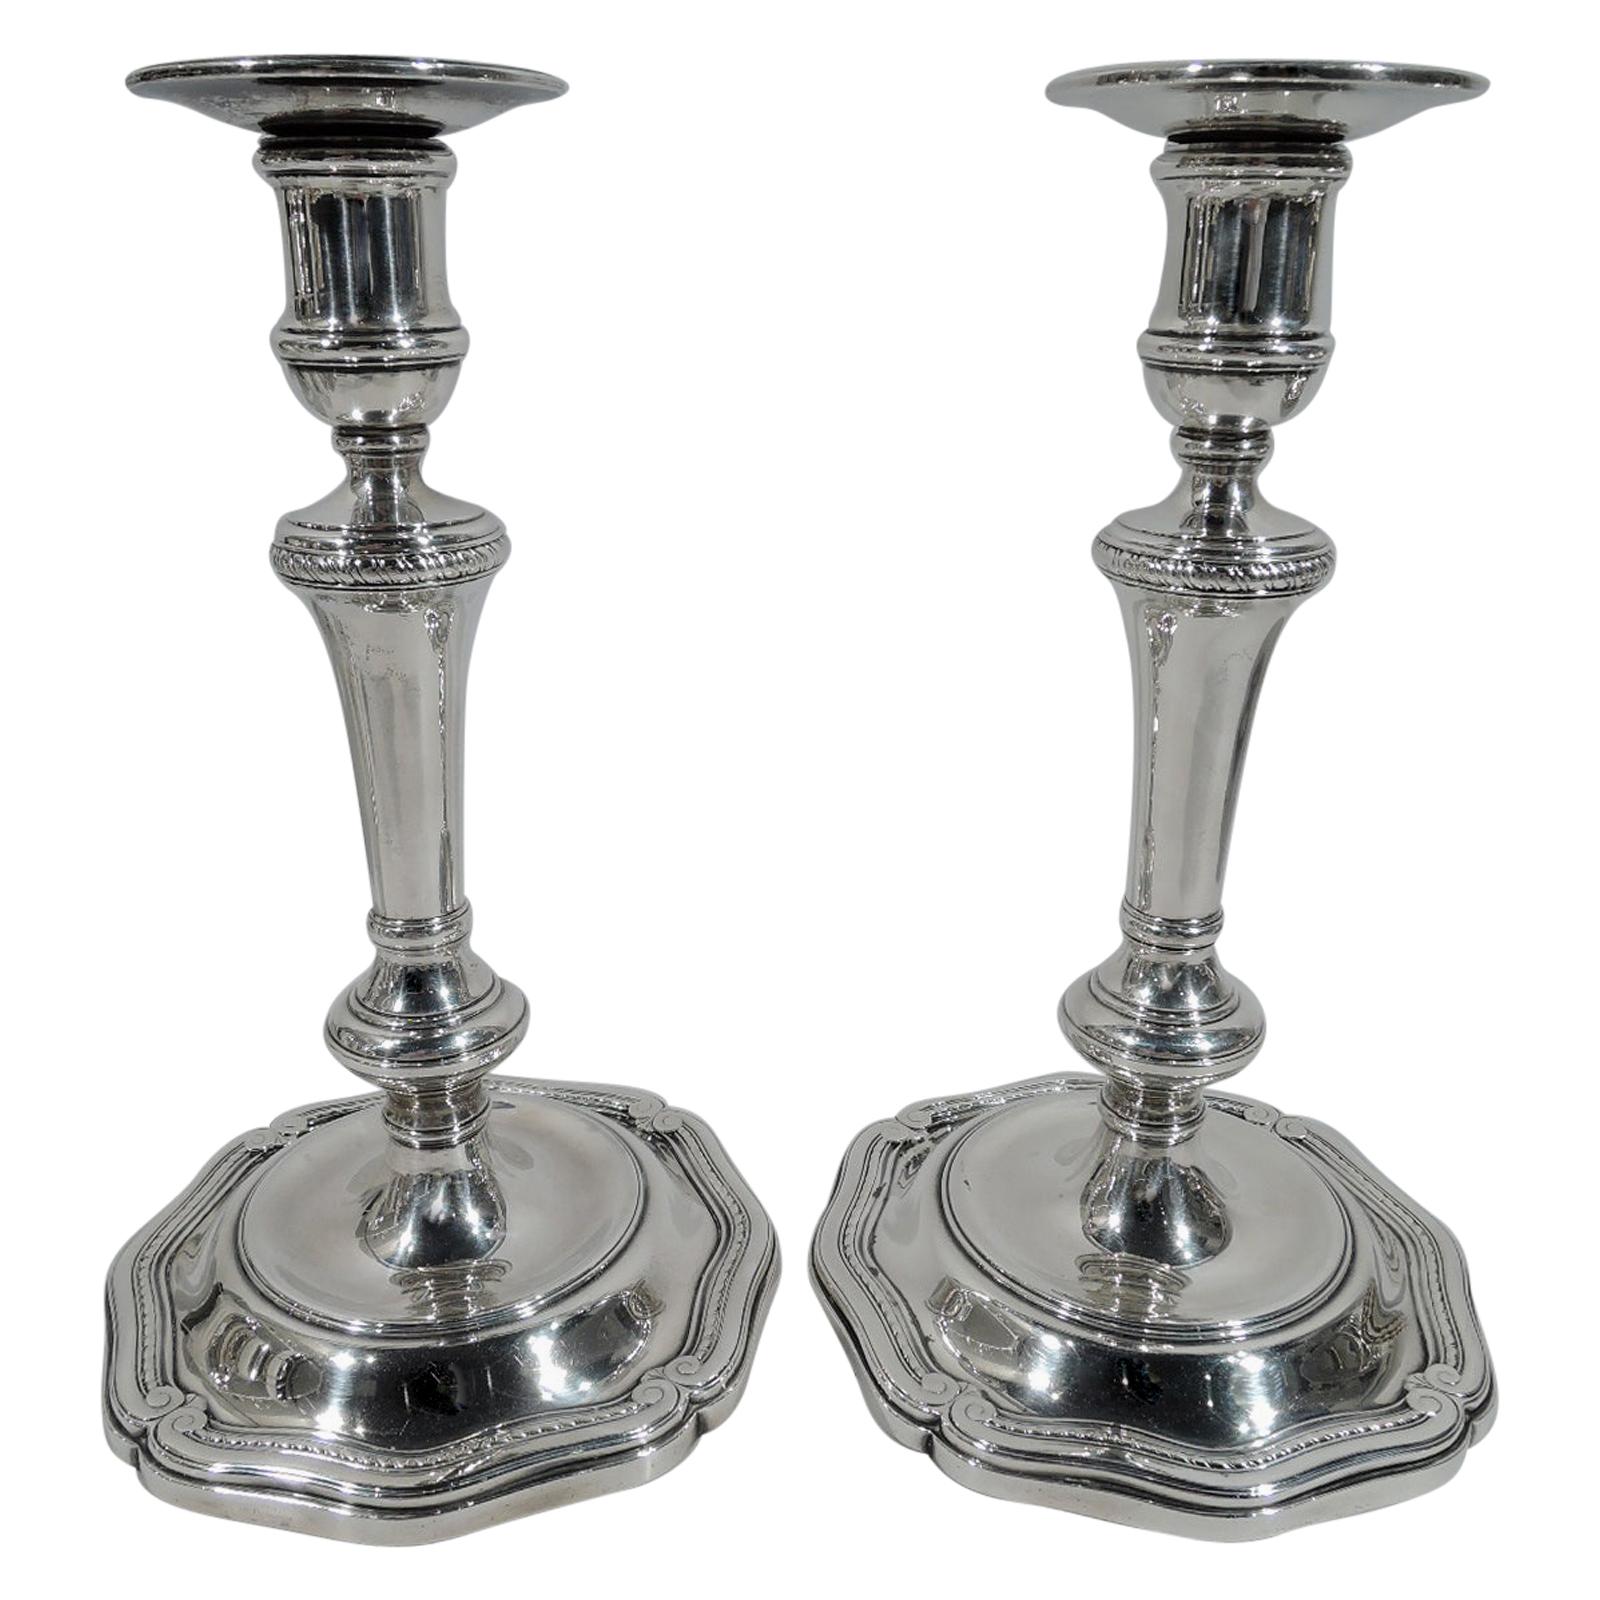 Pair of Tiffany Edwardian Classical Sterling Silver Candlesticks